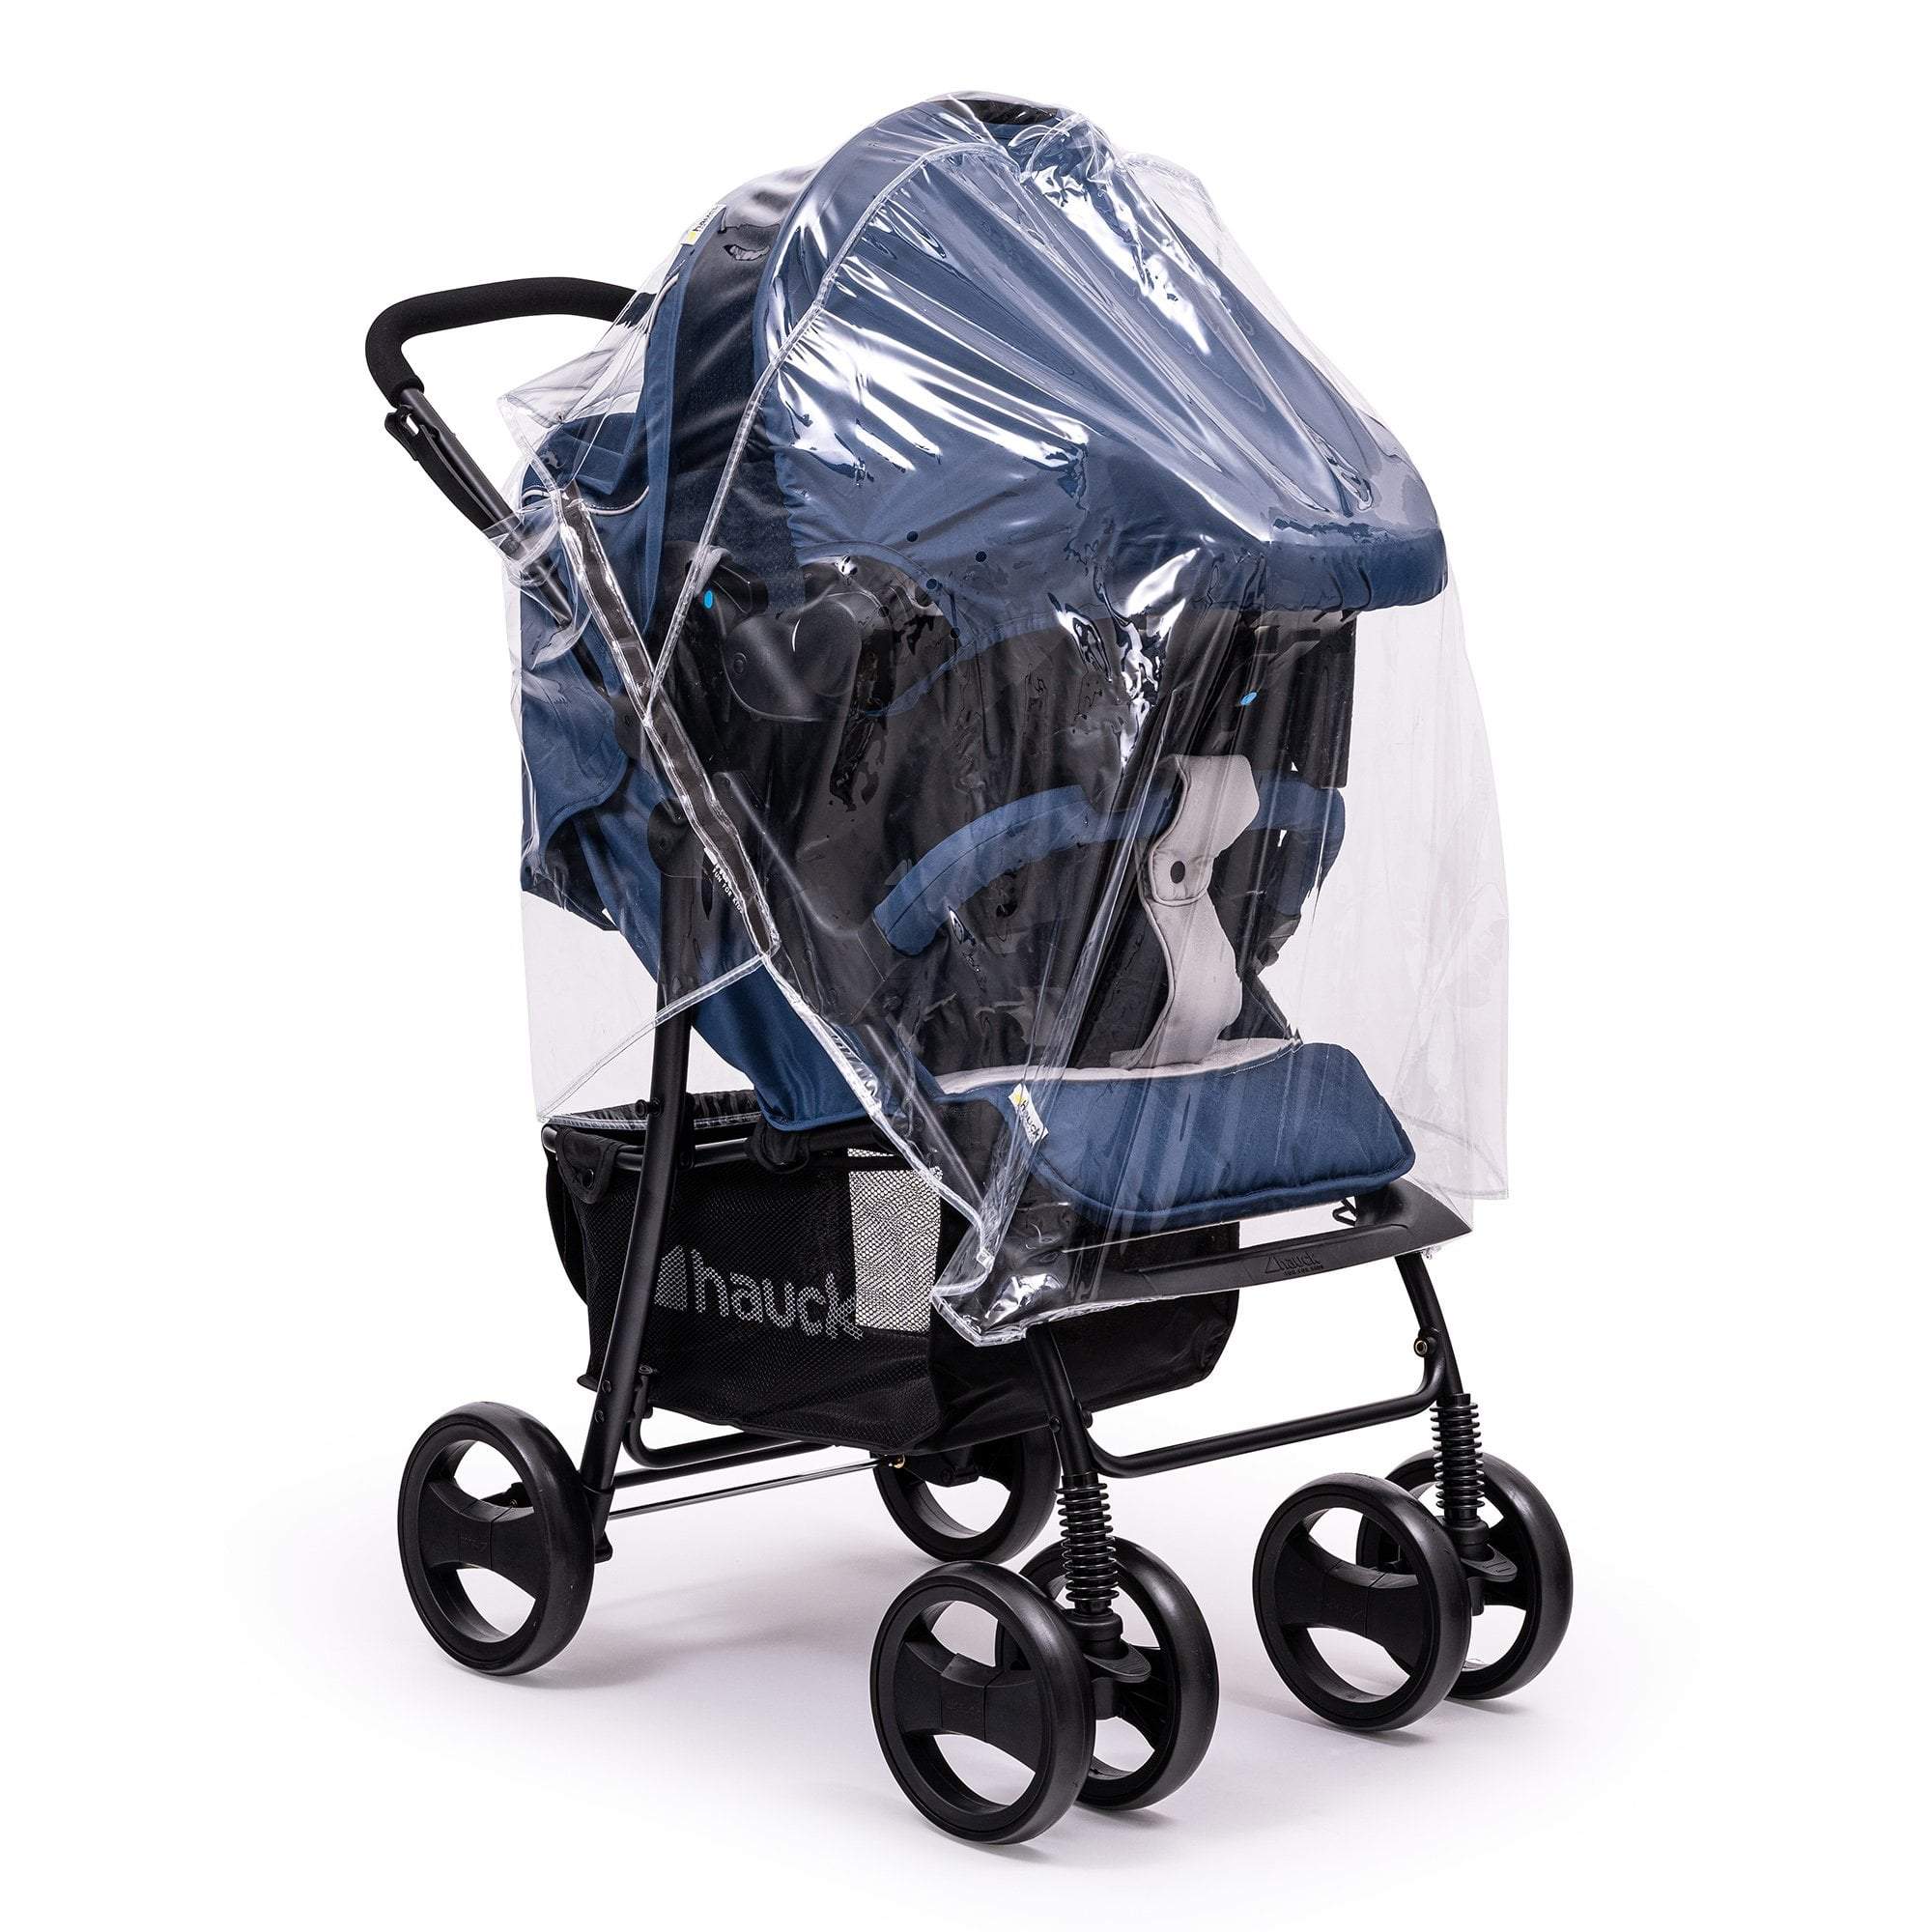 Travel System Raincover Compatible with Casual - Fits All Models - For Your Little One